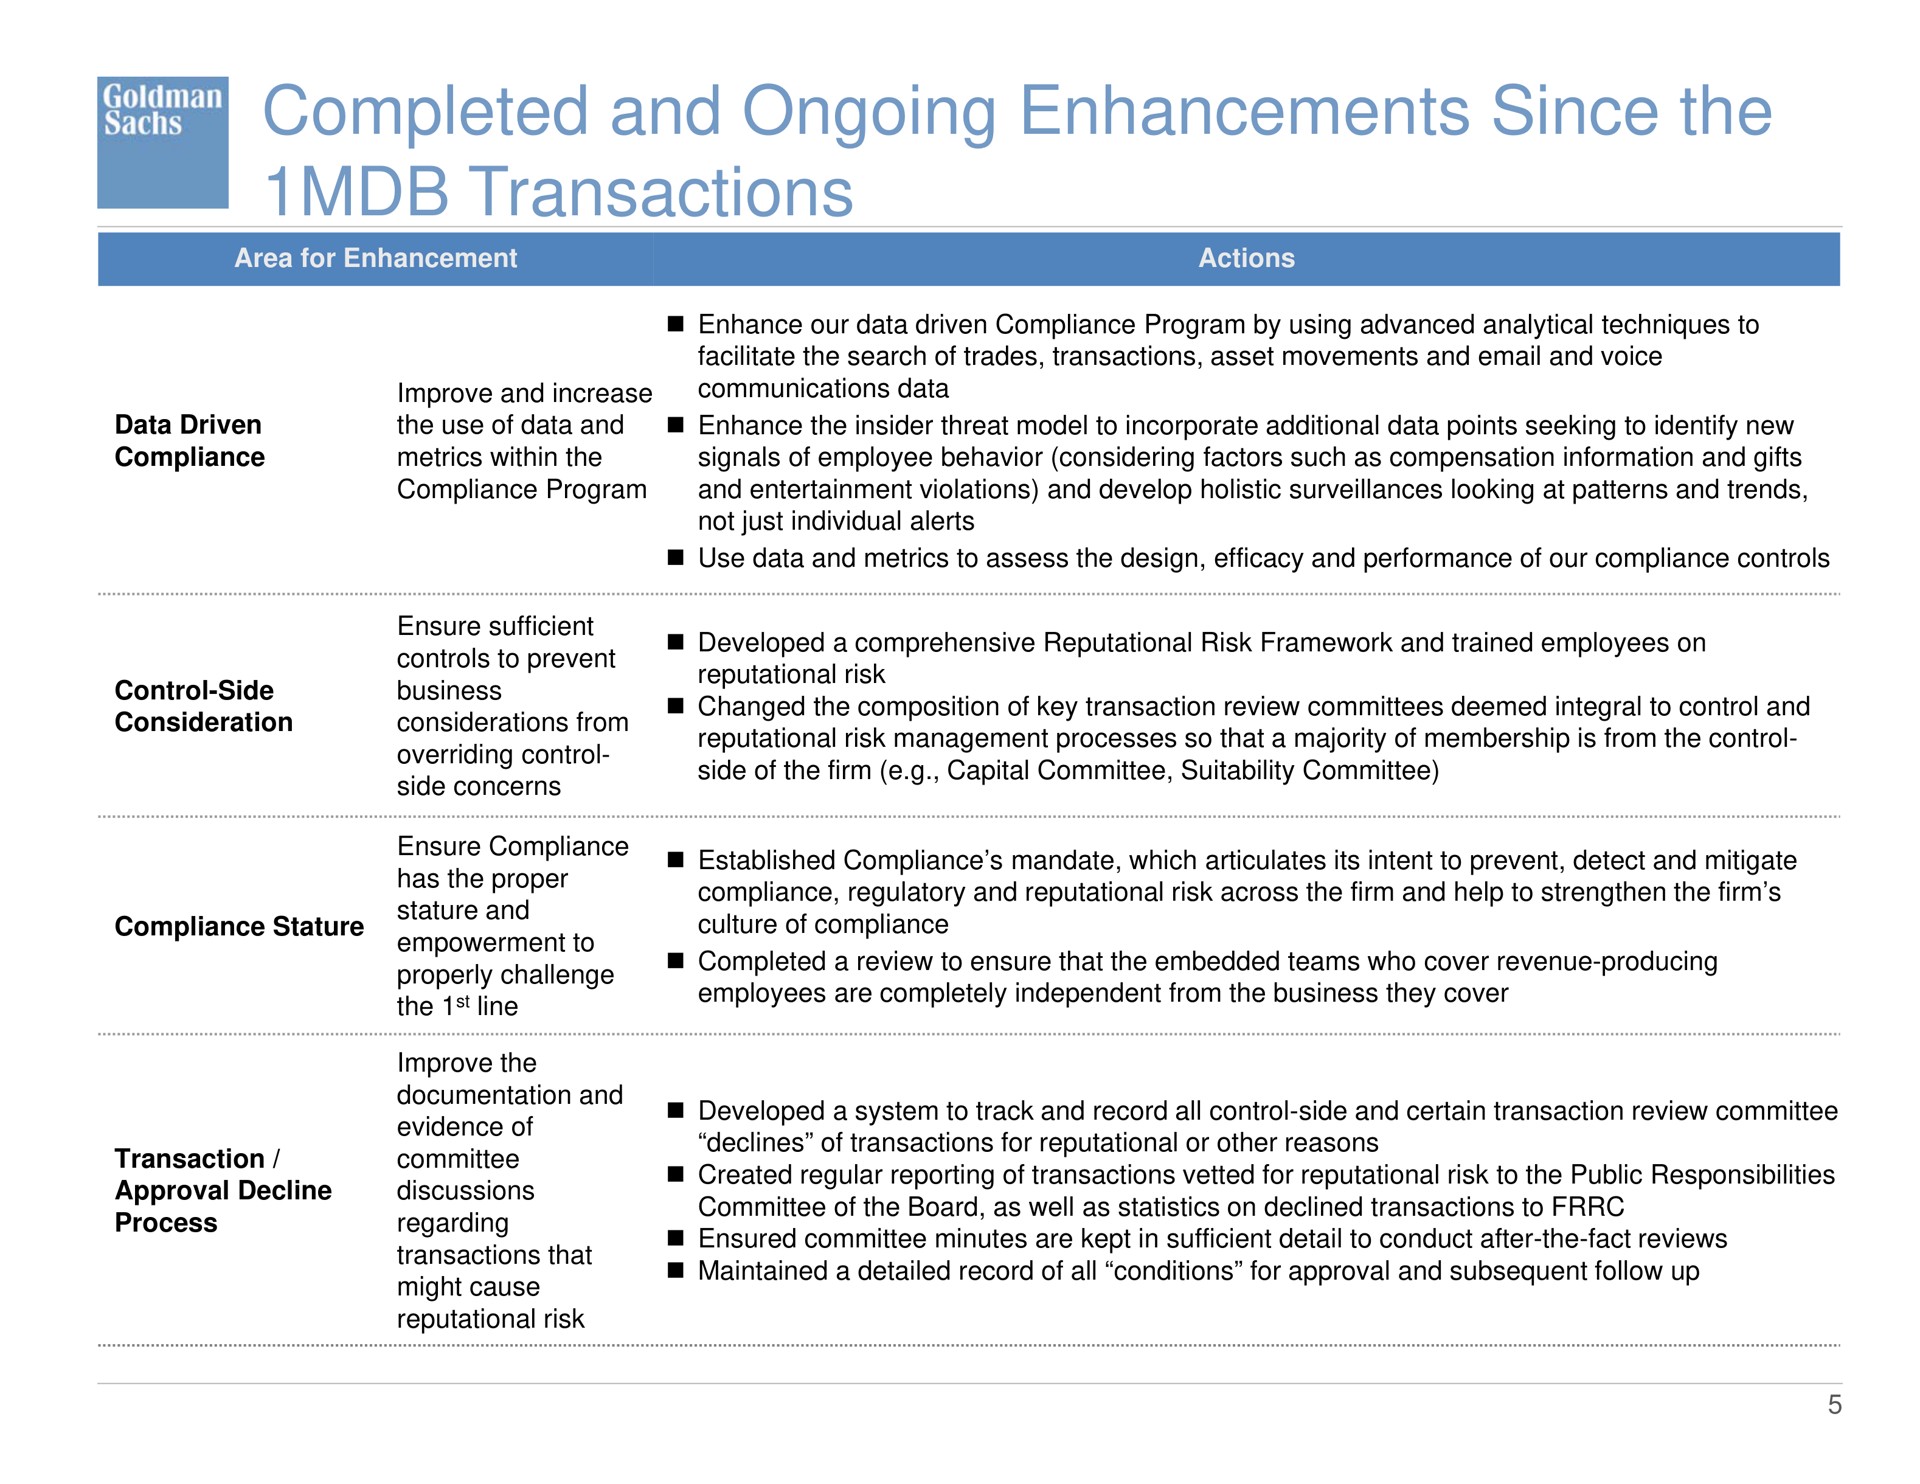 completed and ongoing enhancements since the transactions | Goldman Sachs